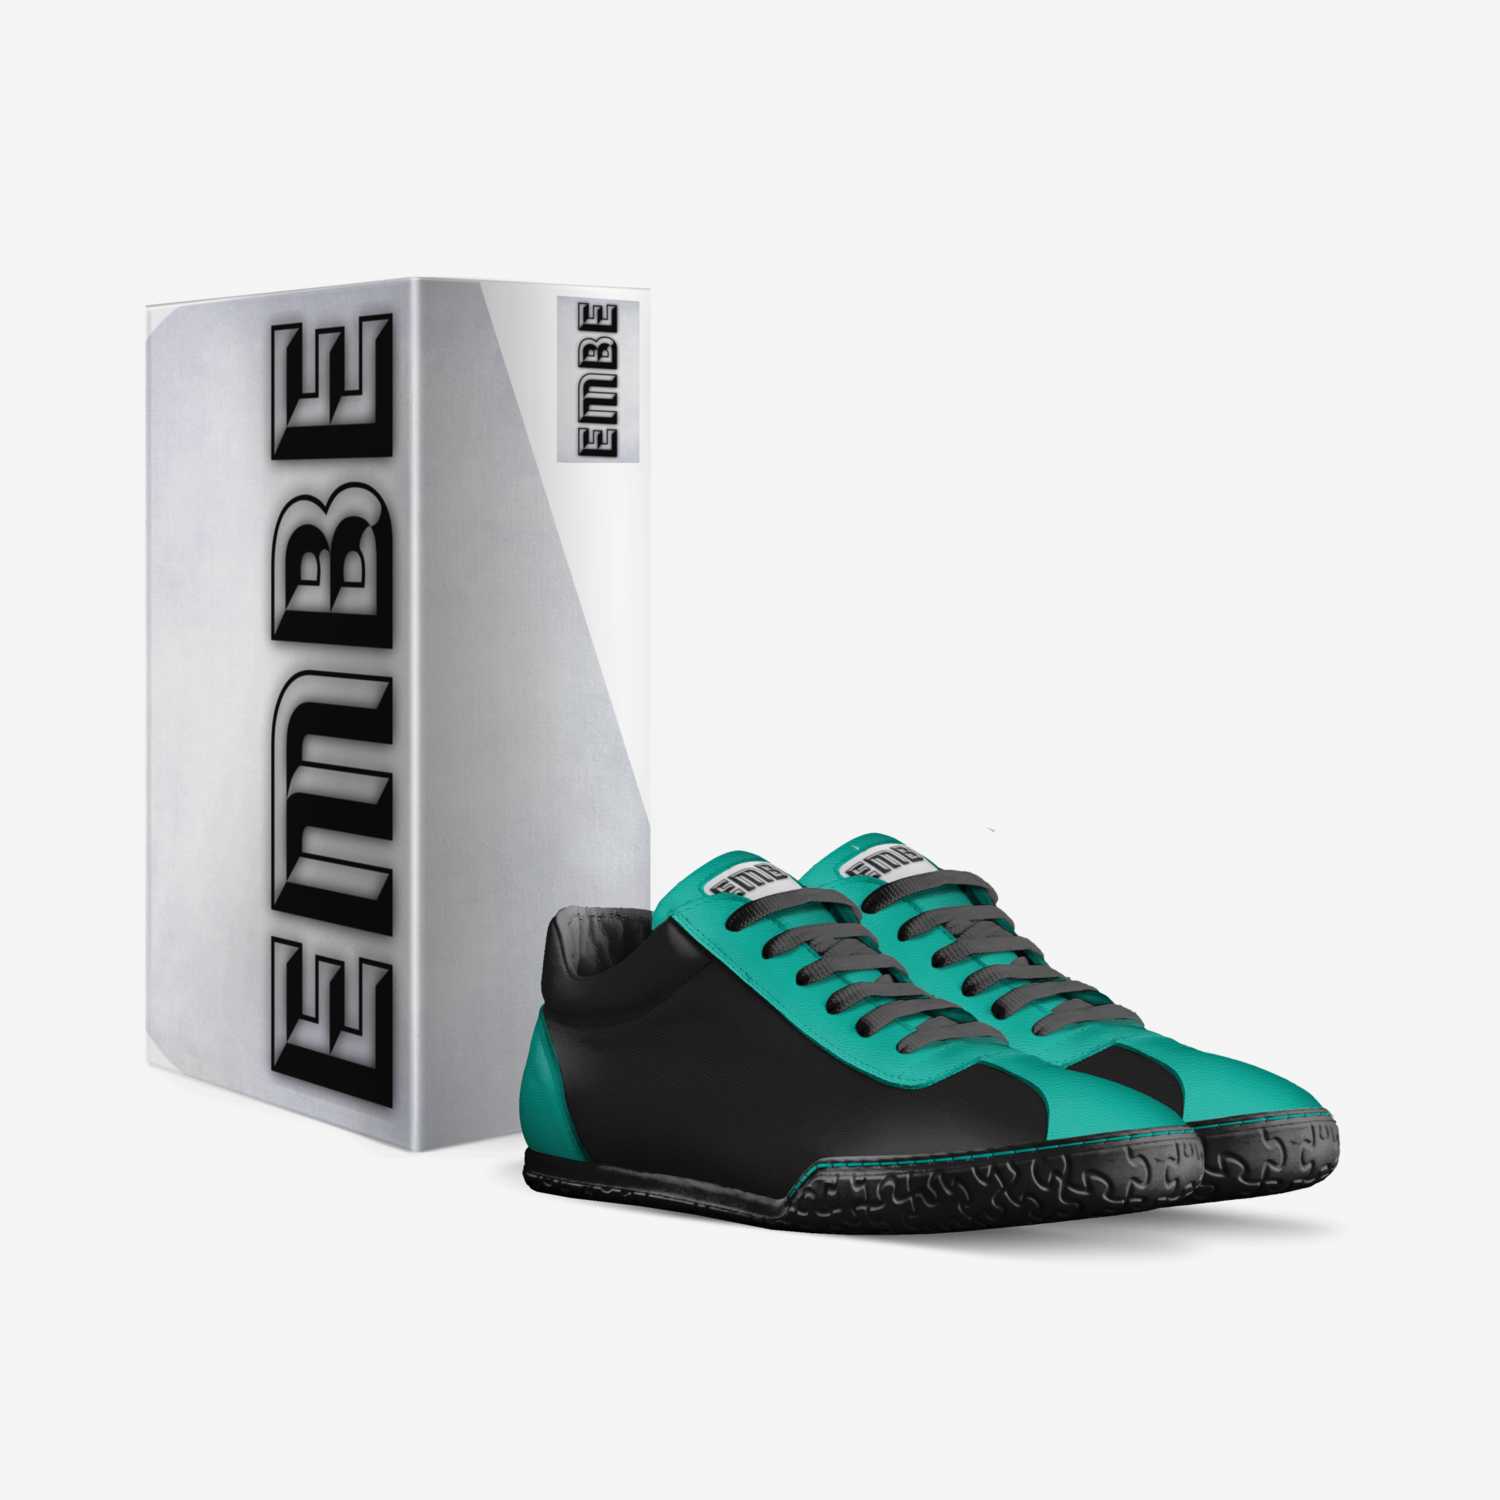 EMBE custom made in Italy shoes by Mat Bluett | Box view